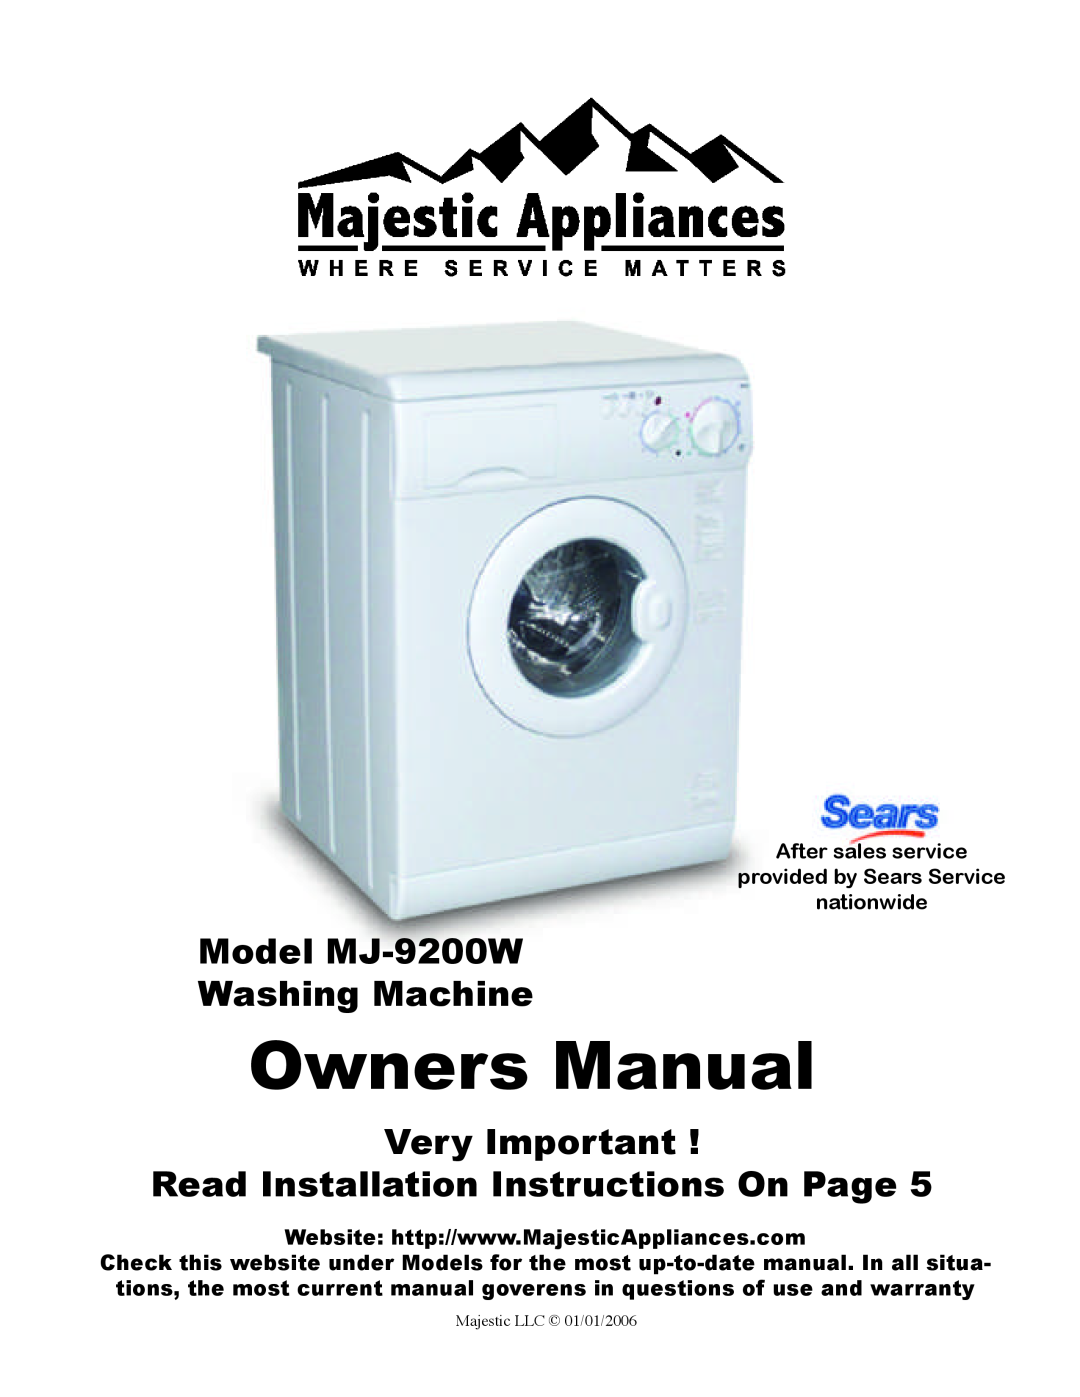 Majestic Appliances owner manual Model MJ-9200W Washing Machine, Very Important, Read Installation Instructions On Page 